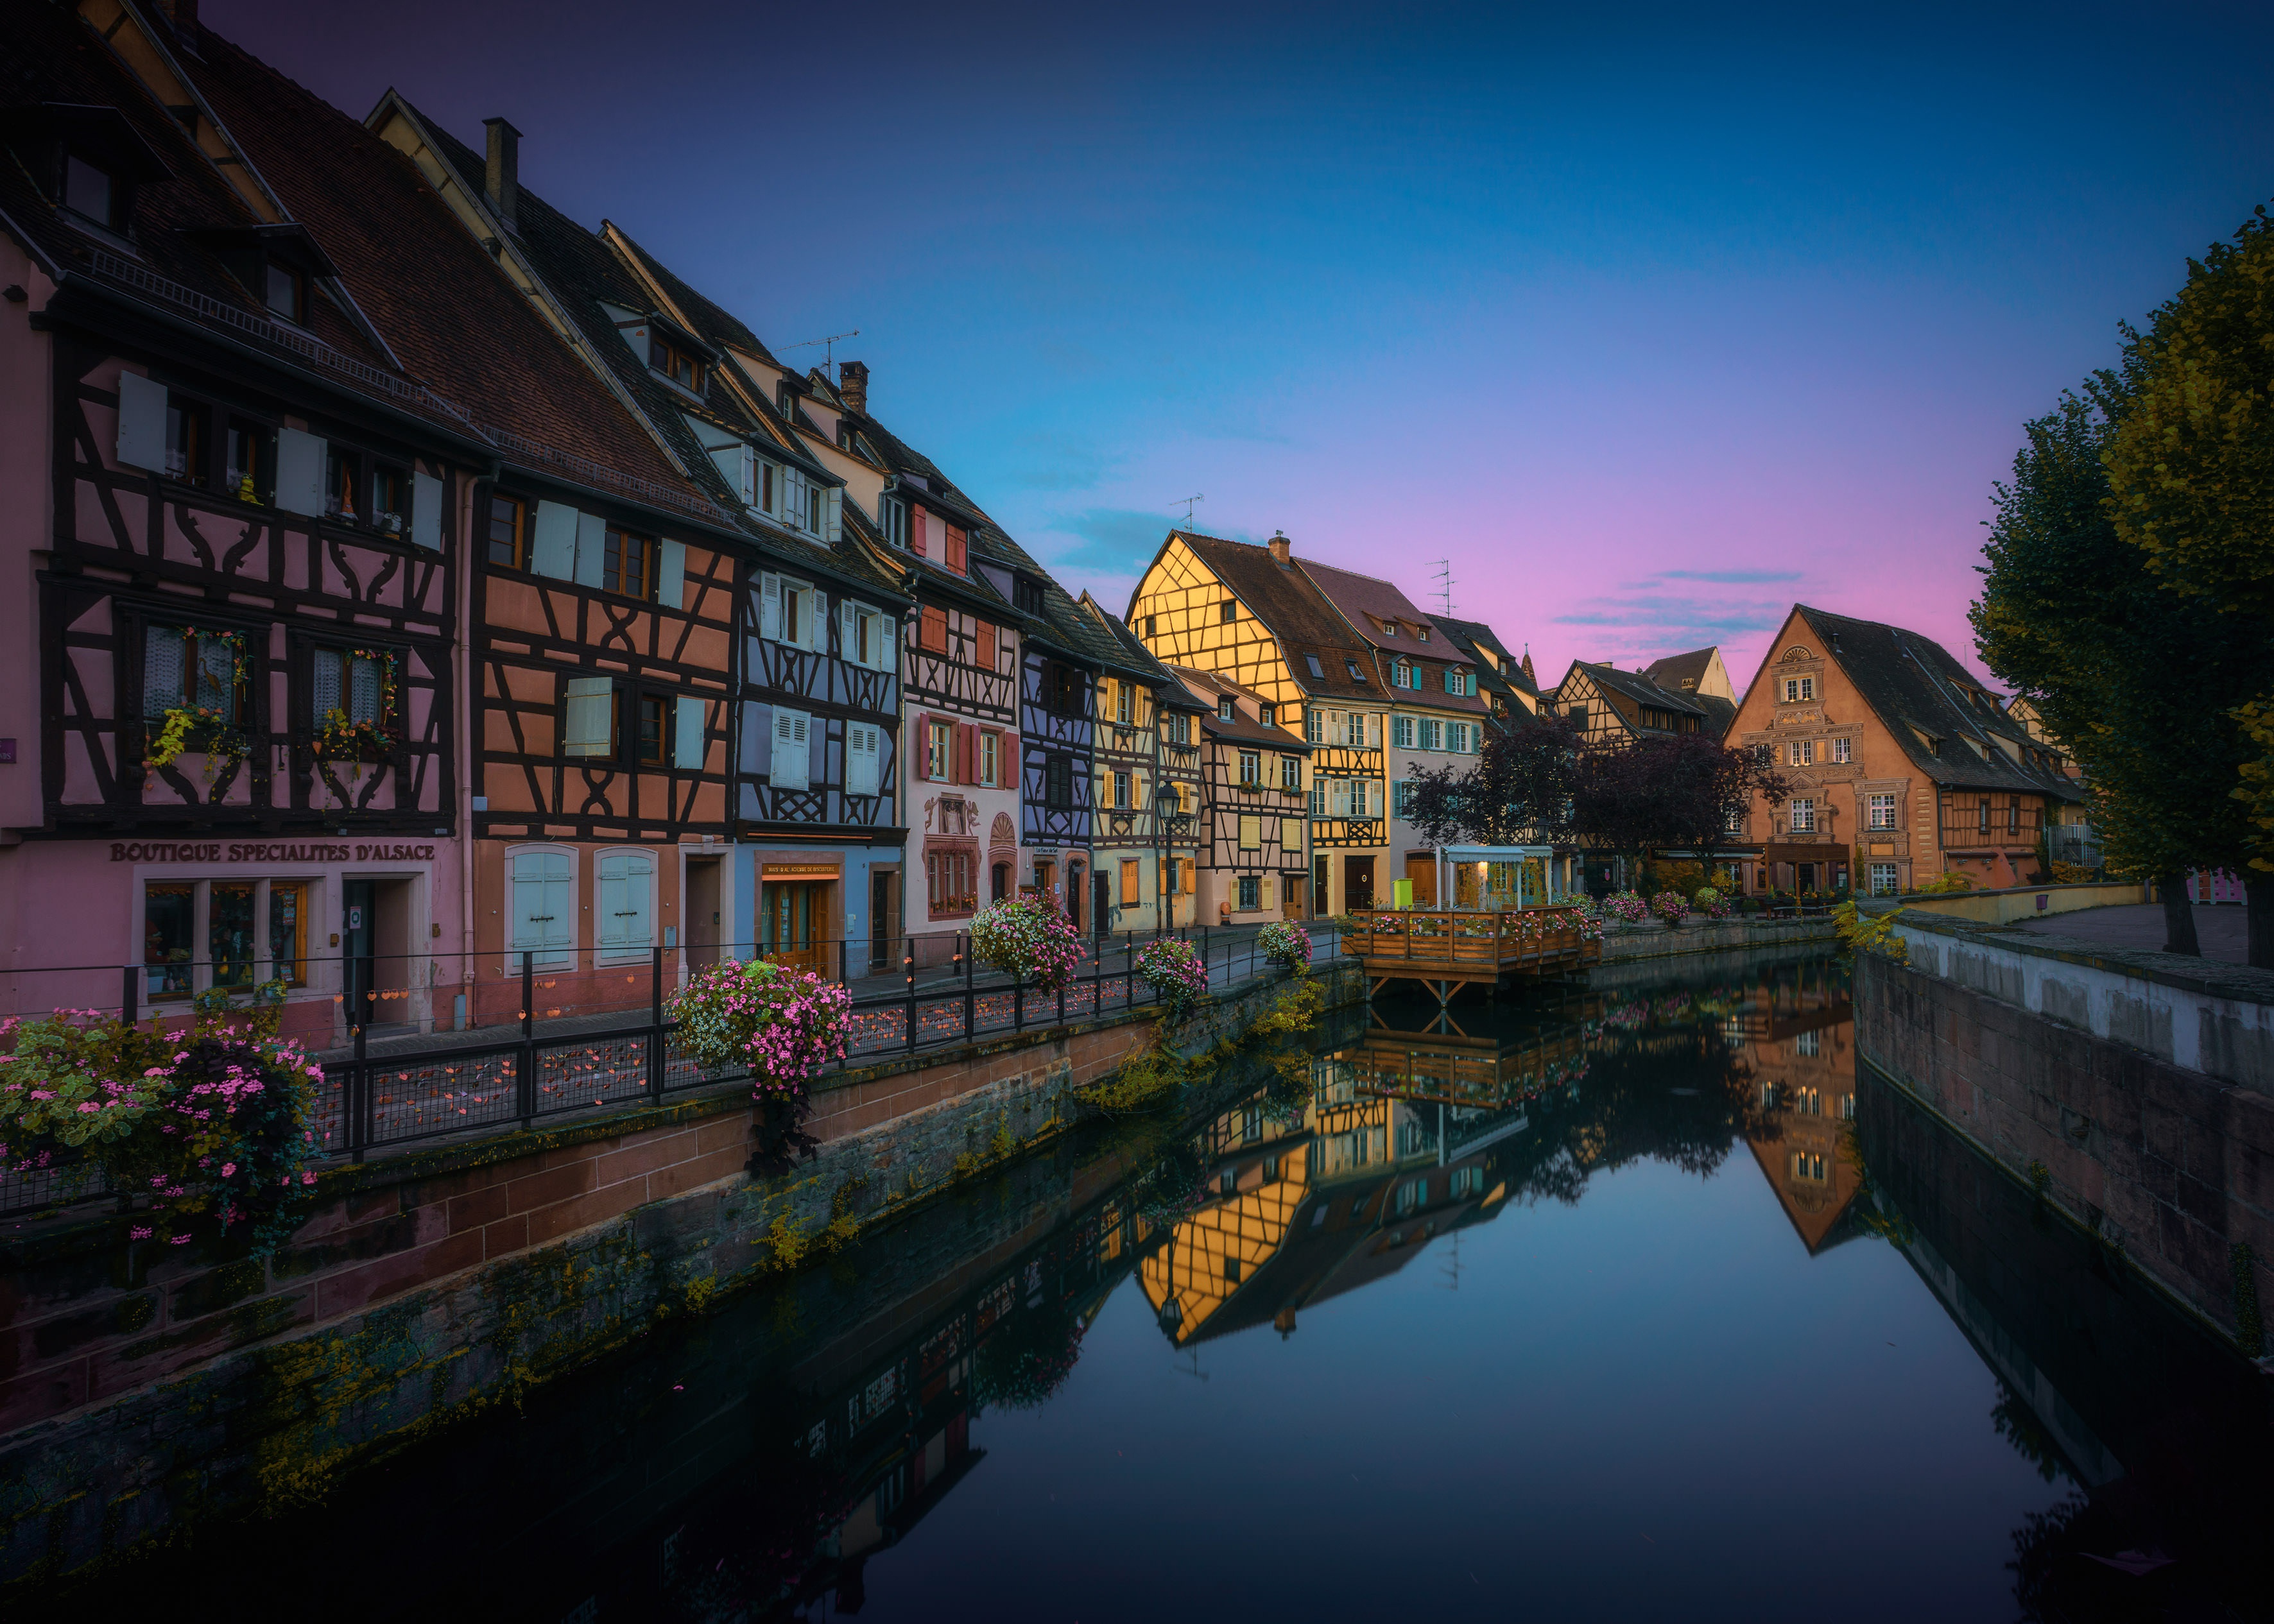 man made, colmar, building, france, house, reflection, river, towns